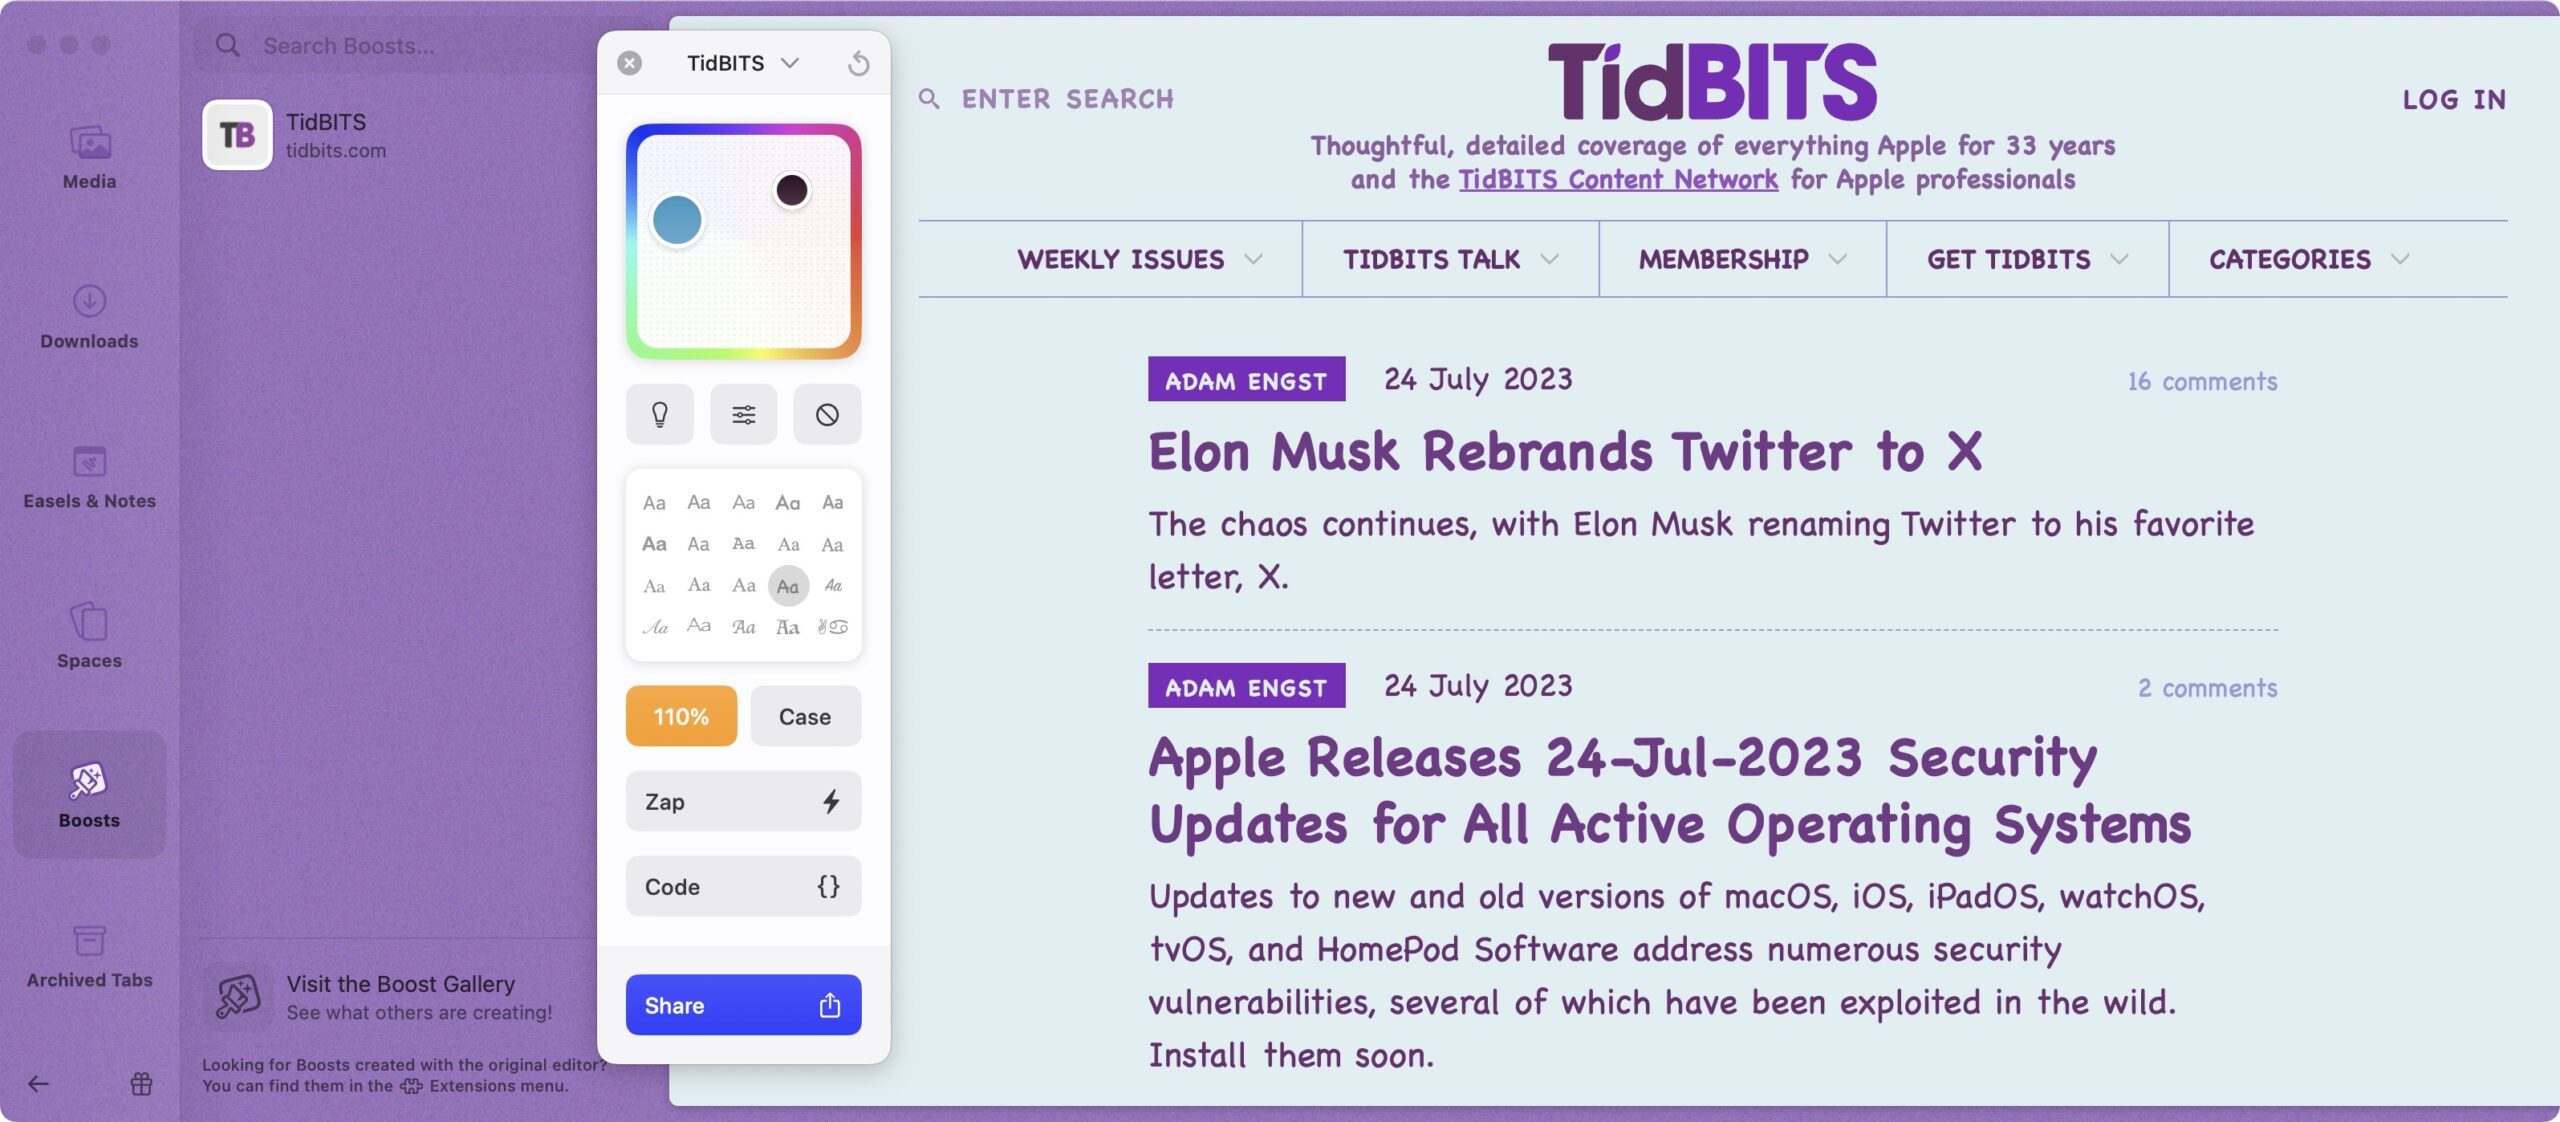 TidBITS website restyled with an Arc Boost